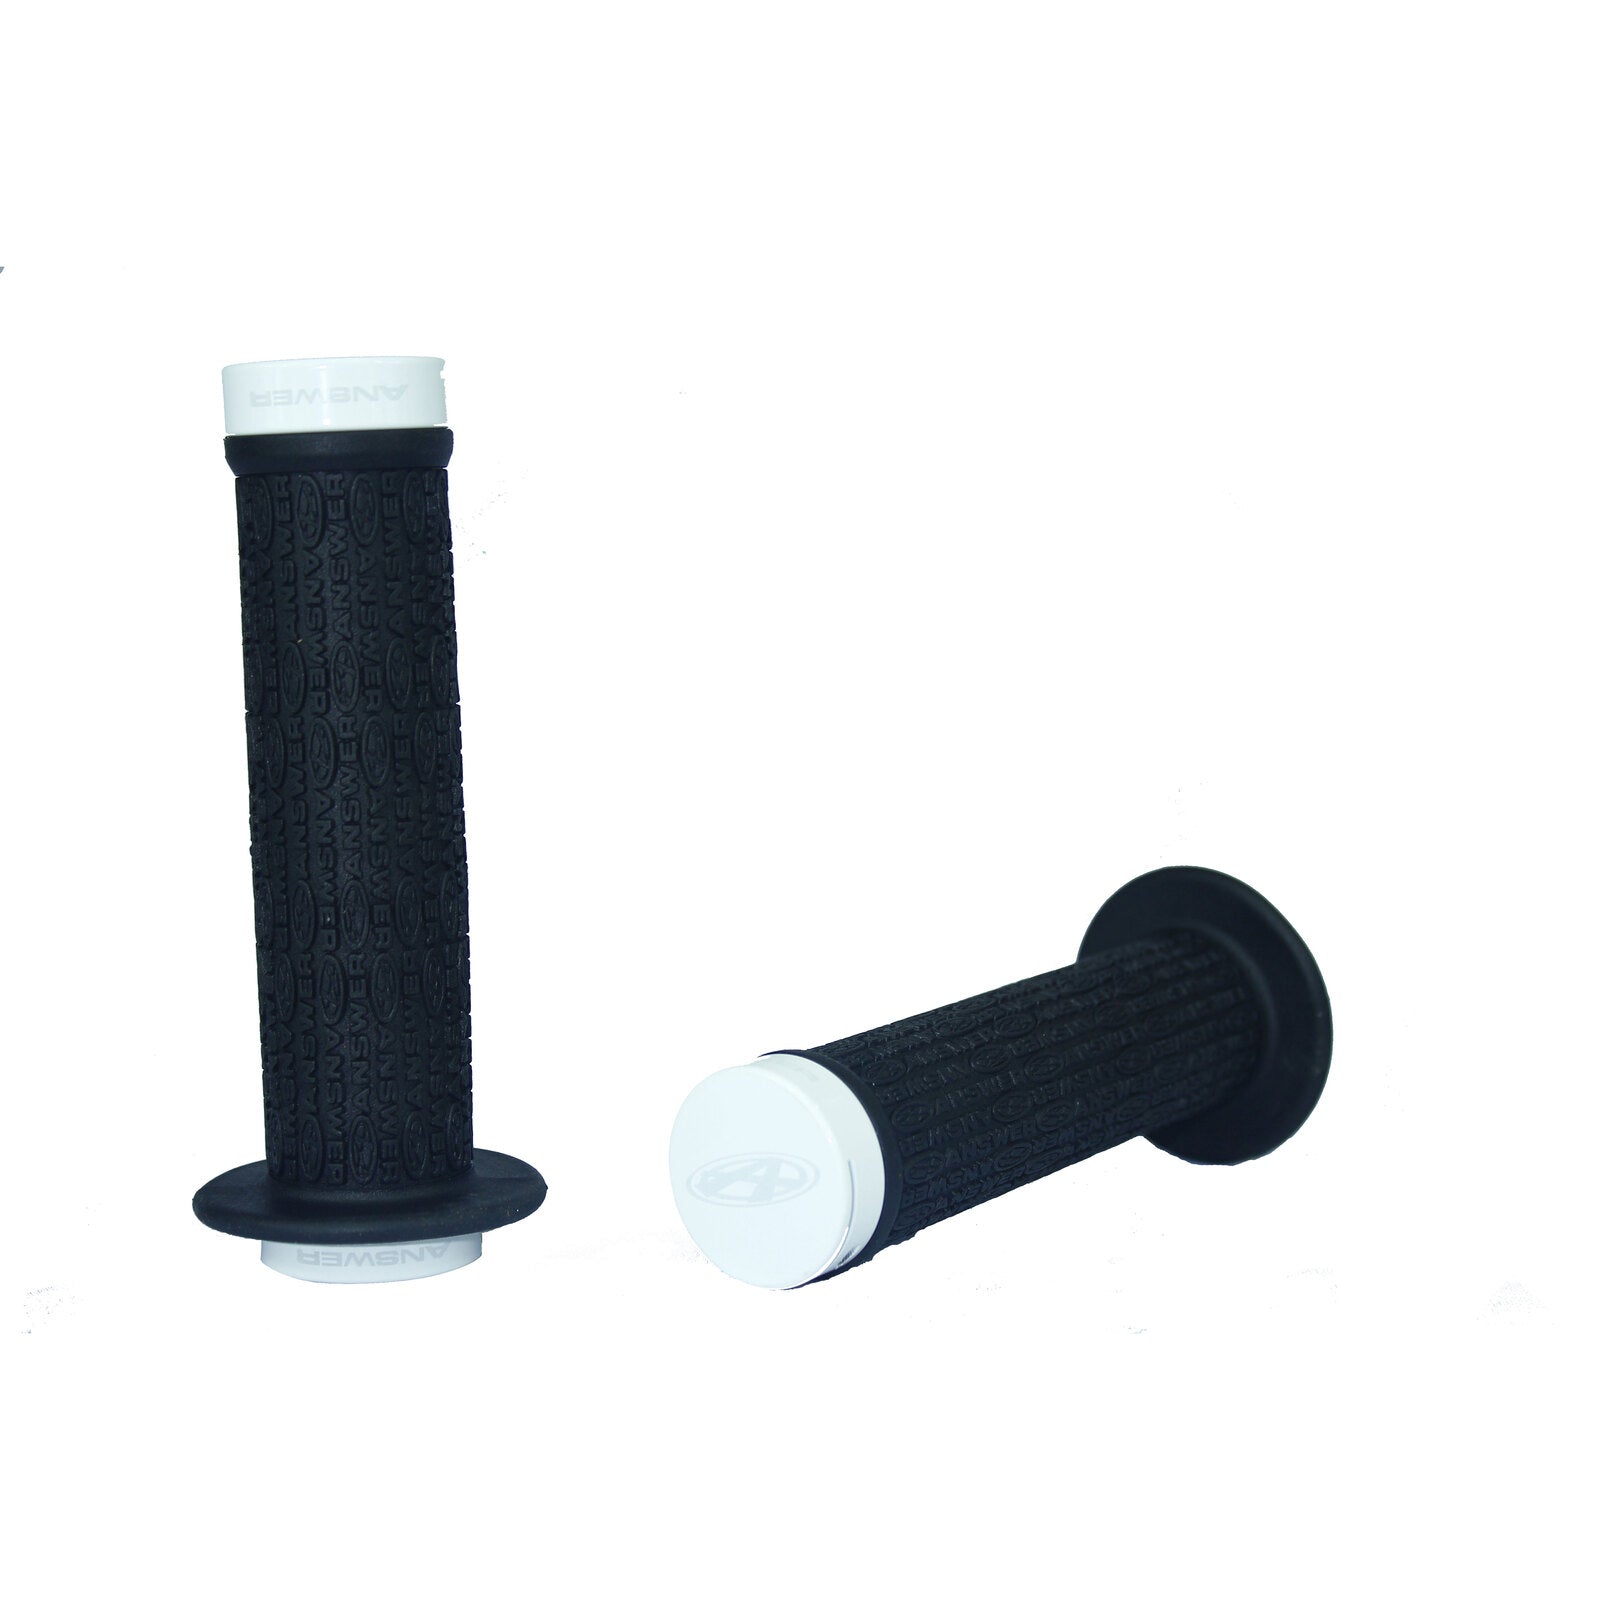 A pair of race bike grips, the Answer Mini Lock-On Flanged Grips, featuring a flangeless design, showcased on a white background.